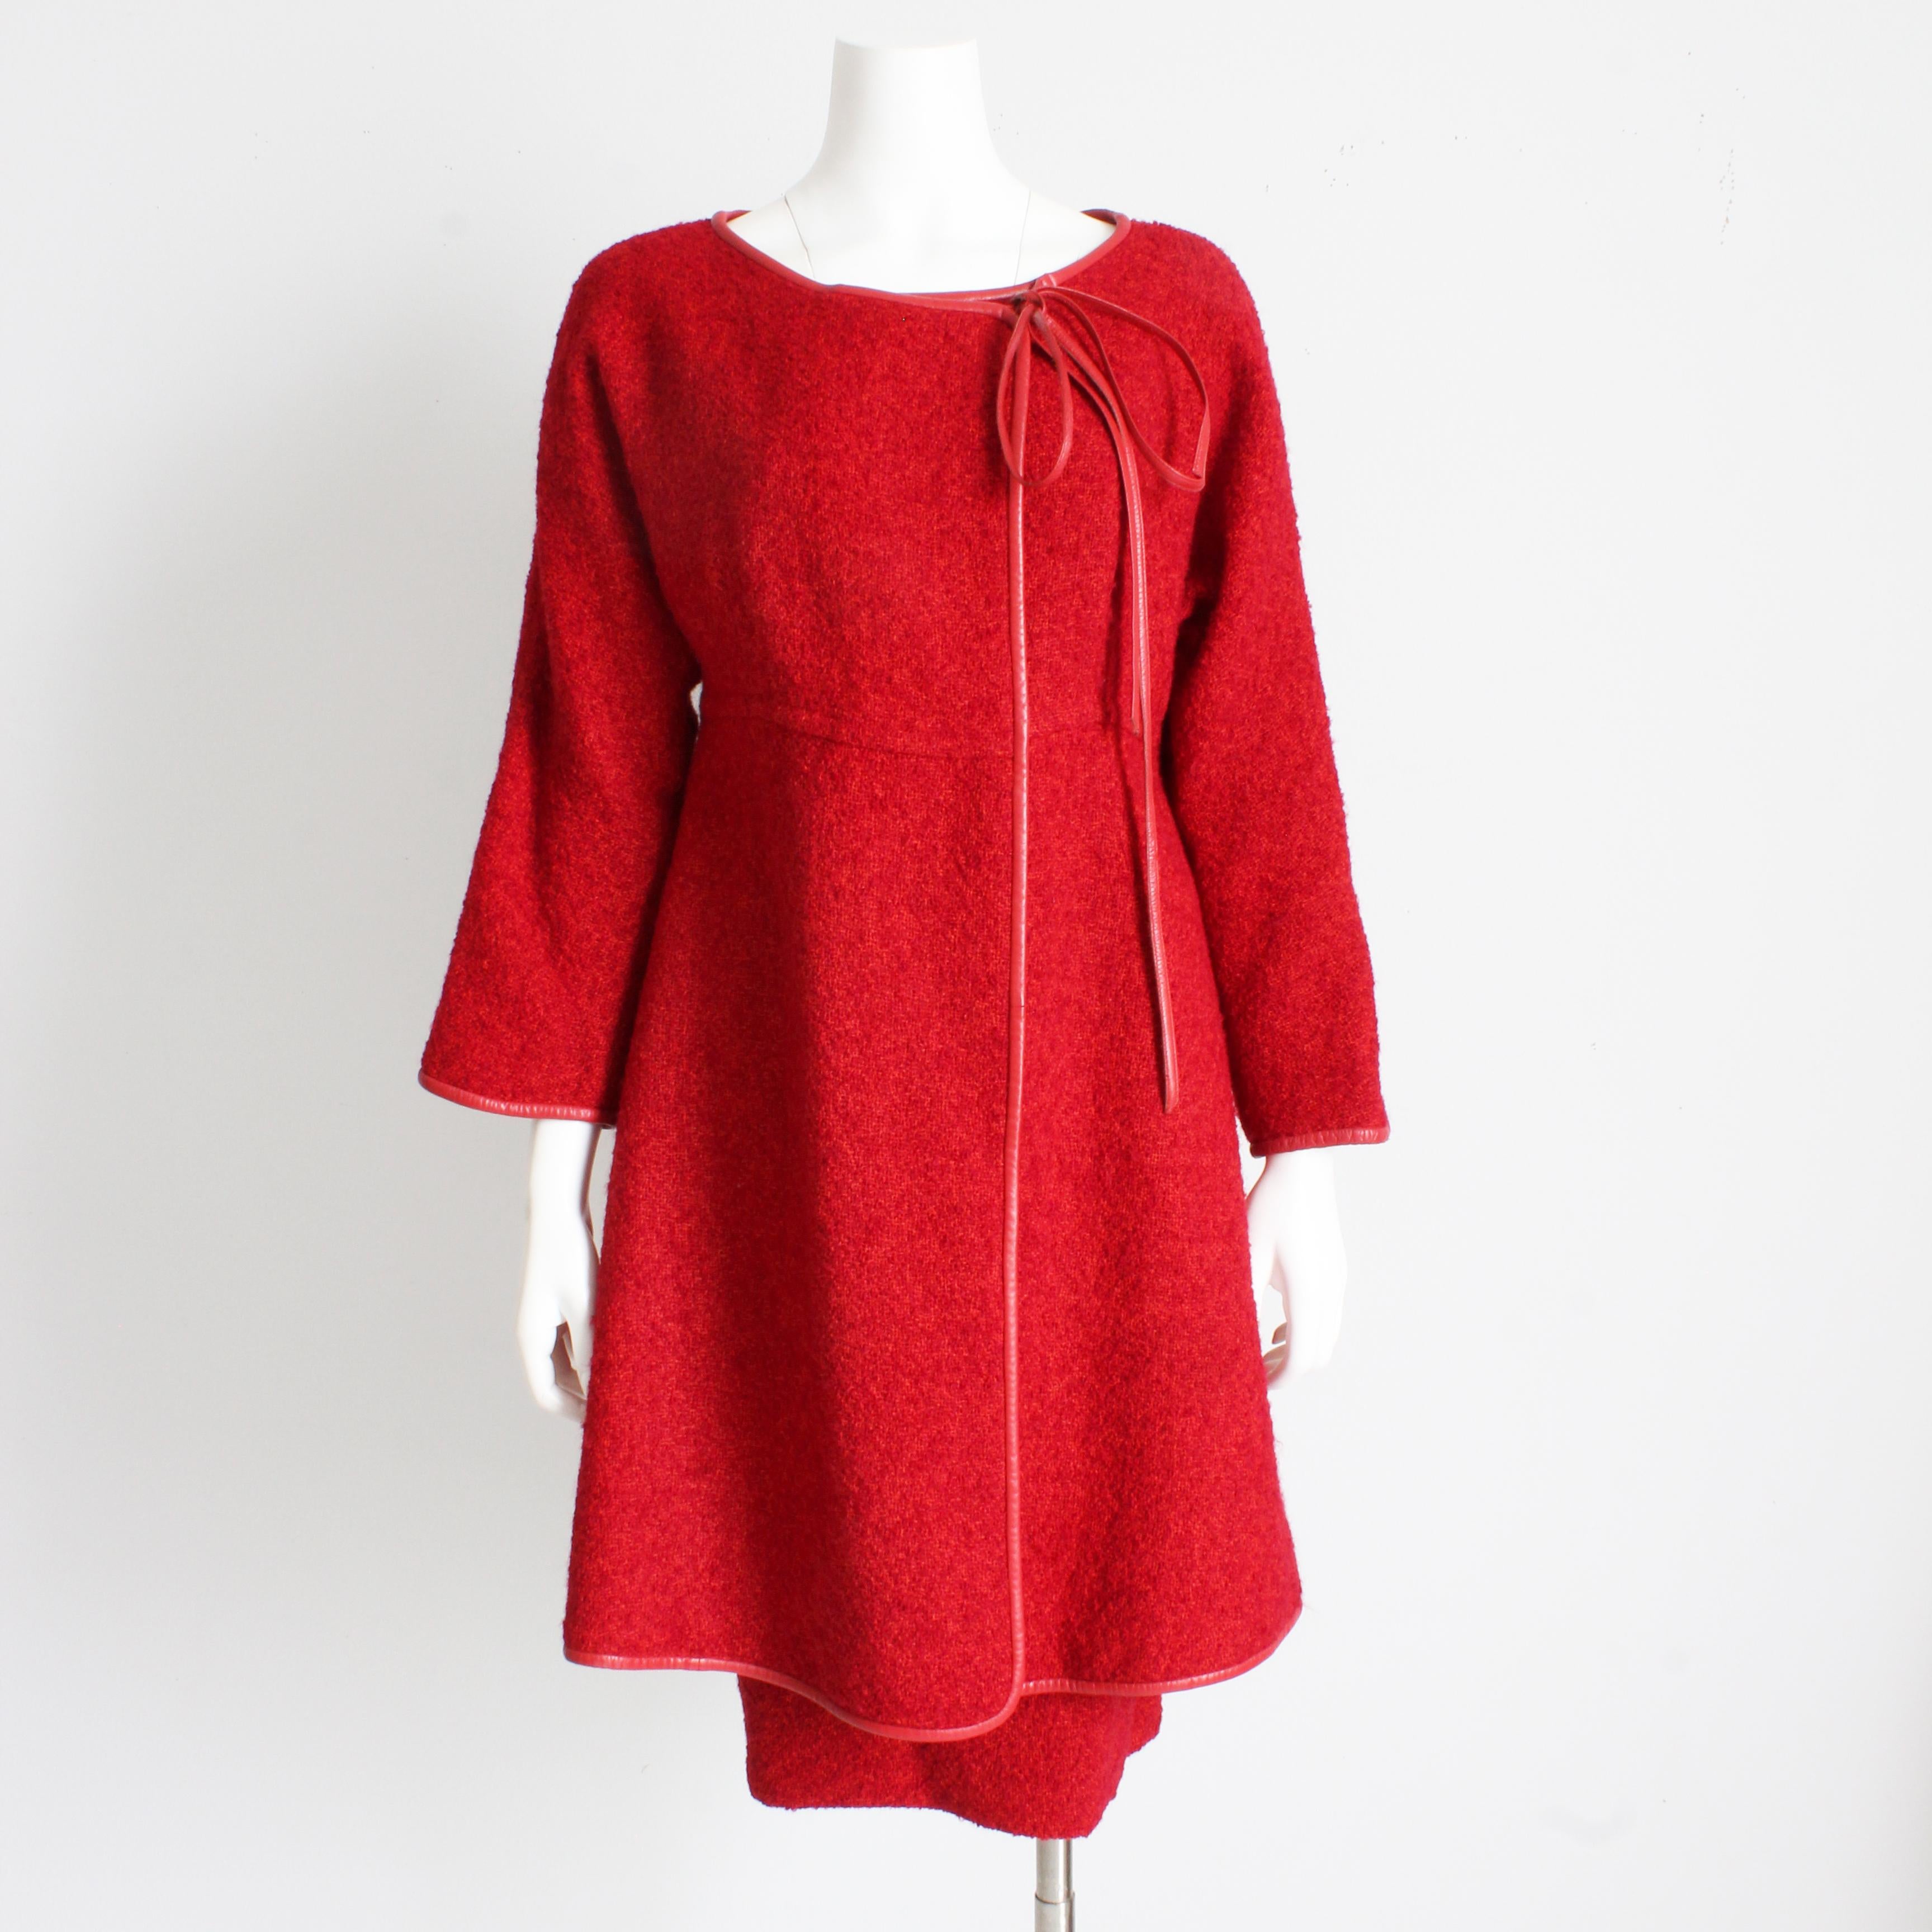 Authentic, vintage, preowned Bonnie Cashin for Sills jacket and skirt set, circa the 1960s. Made from an absolutely fabulous cherry red, pink and orange boucle wool knit, the jacket is trimmed in rich, cherry red leather.

A gorgeous and